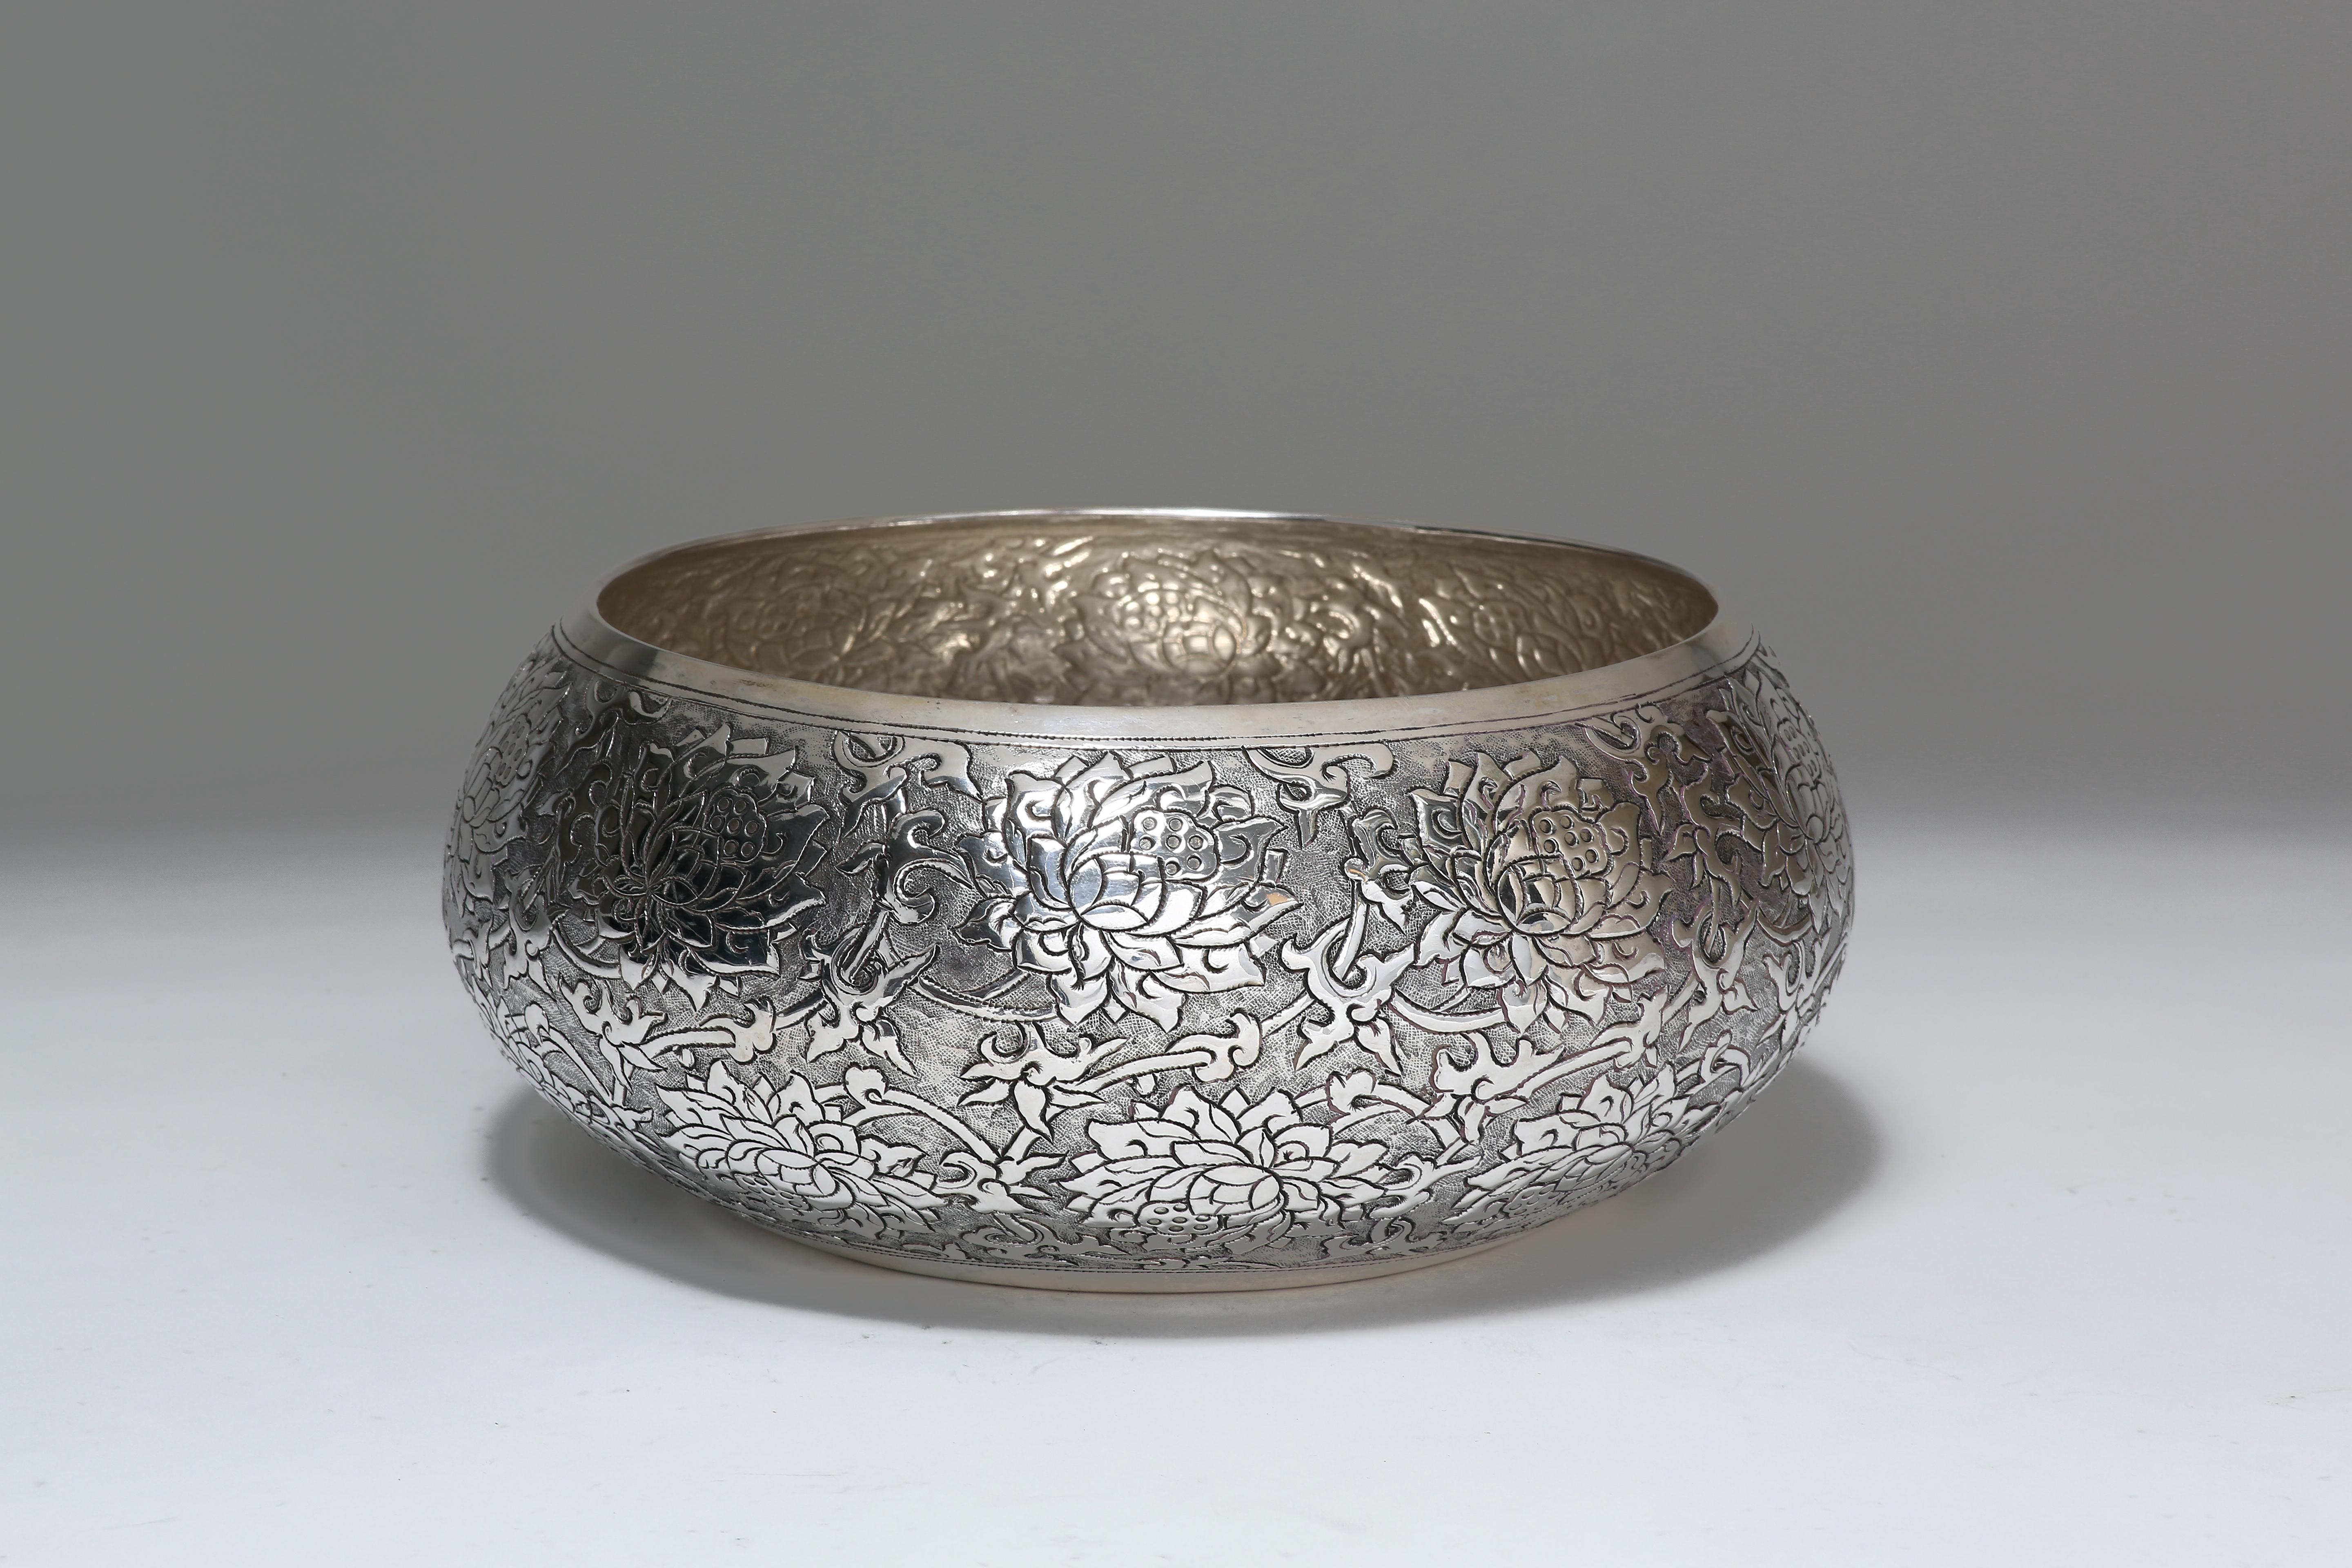 The fine hand-worked solid silver bowl is meticulously chased with classic scrolling lotus motif. It is available in other sizes.
Lotus is a symbol of purity, grace, elangcy and perseverance. The silver is 90% pure.